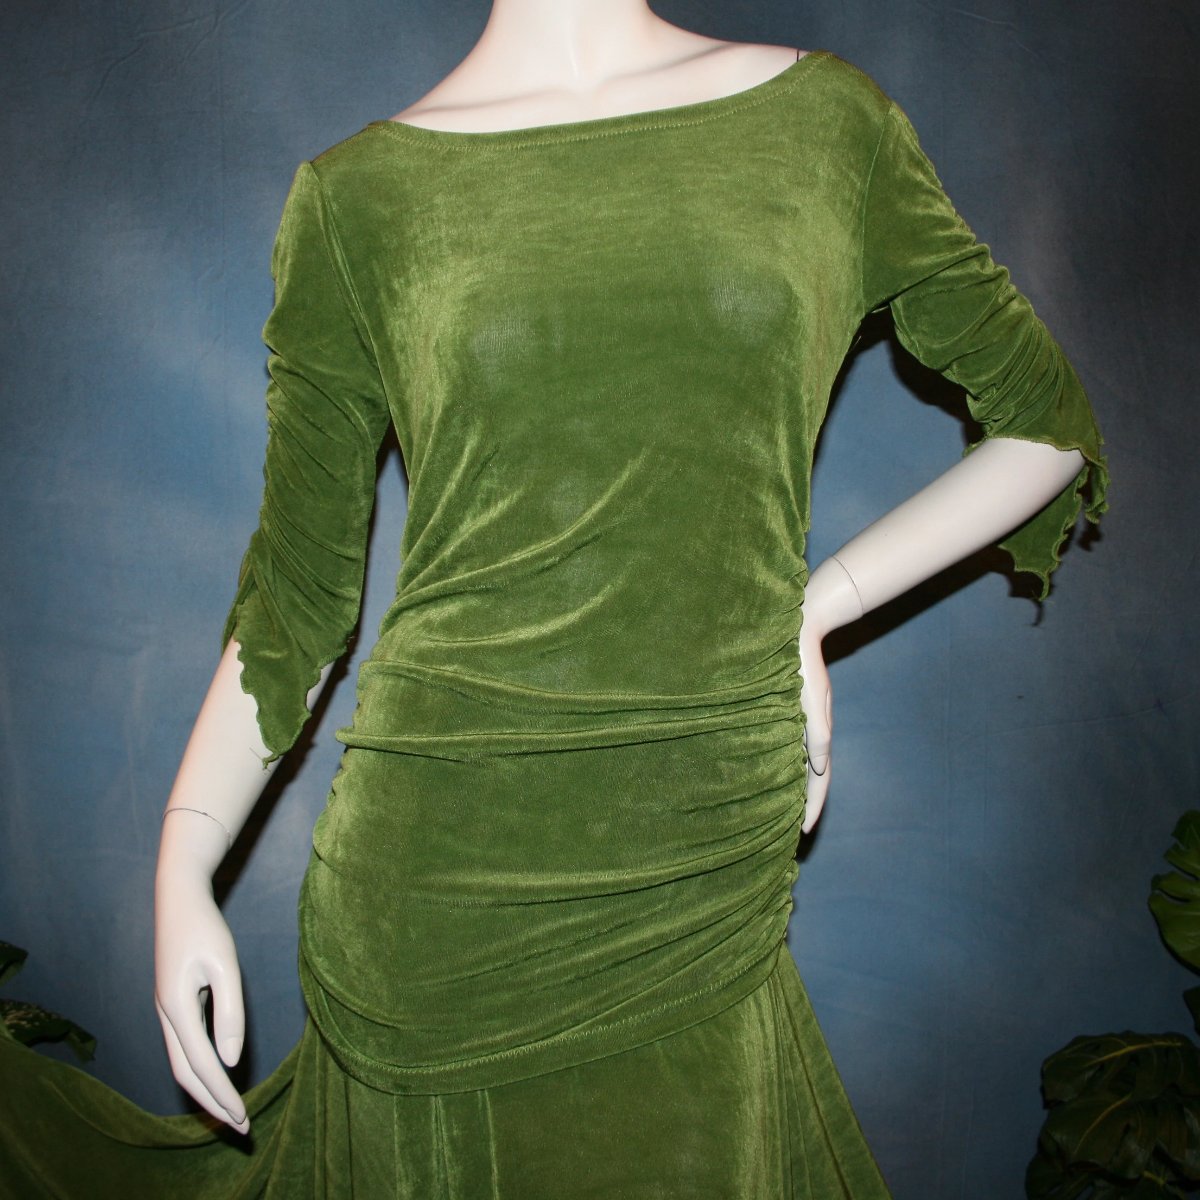 cloe upper view of Ruched top with ruched 3/4 sleeves with a slight flaired detail includes trumpet flaired ballroom dance skirt with peaks created of luxurious olive green solid slinky fabric, & can be custom created in many colors. Great for ballroom dance teachers!